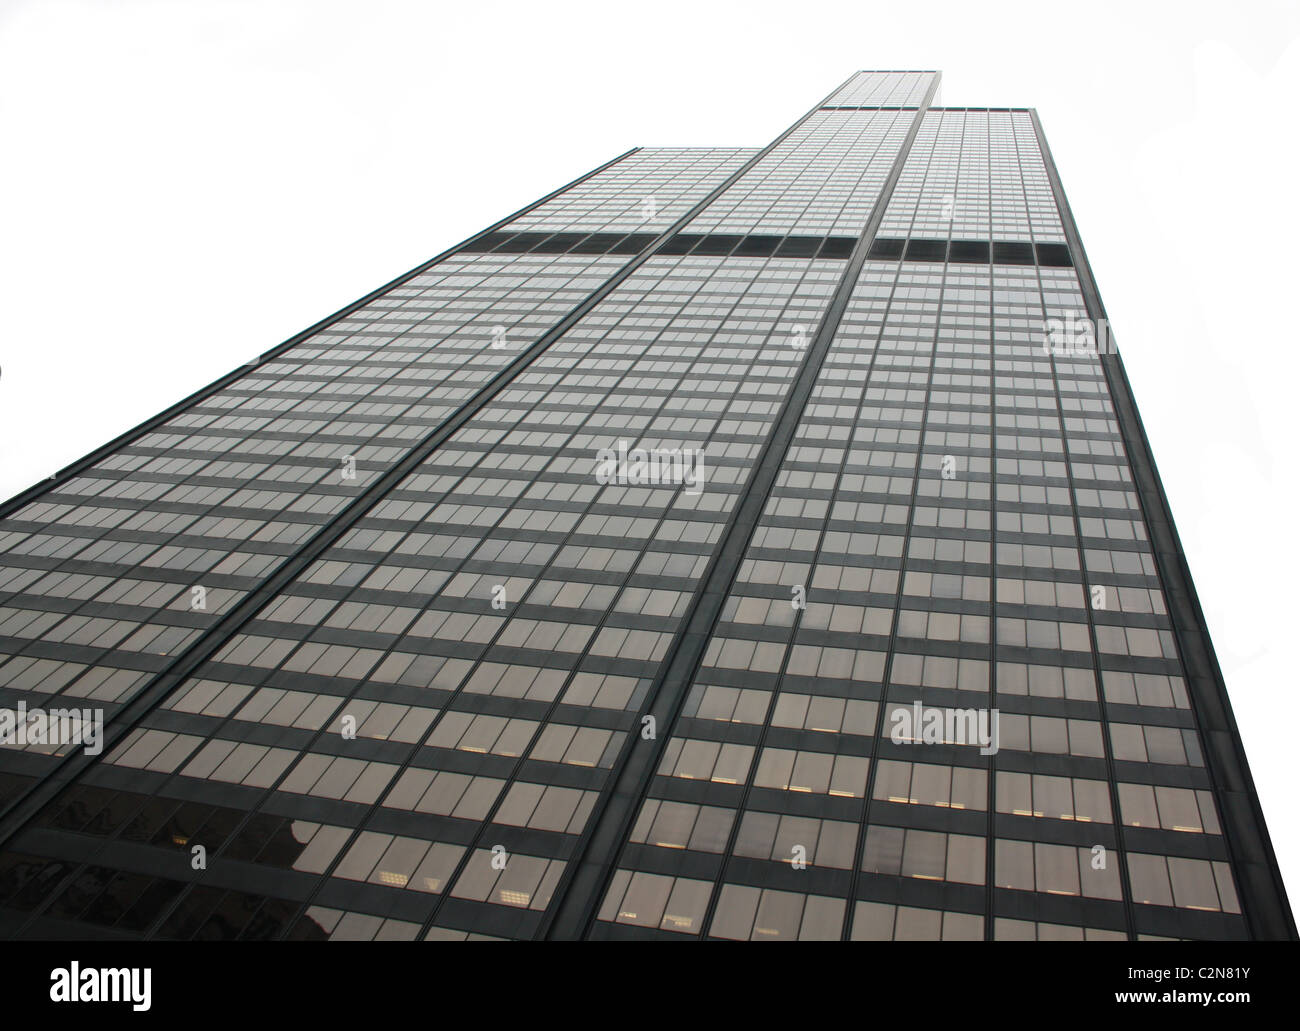 Sears tower reaching for the sky Stock Photo